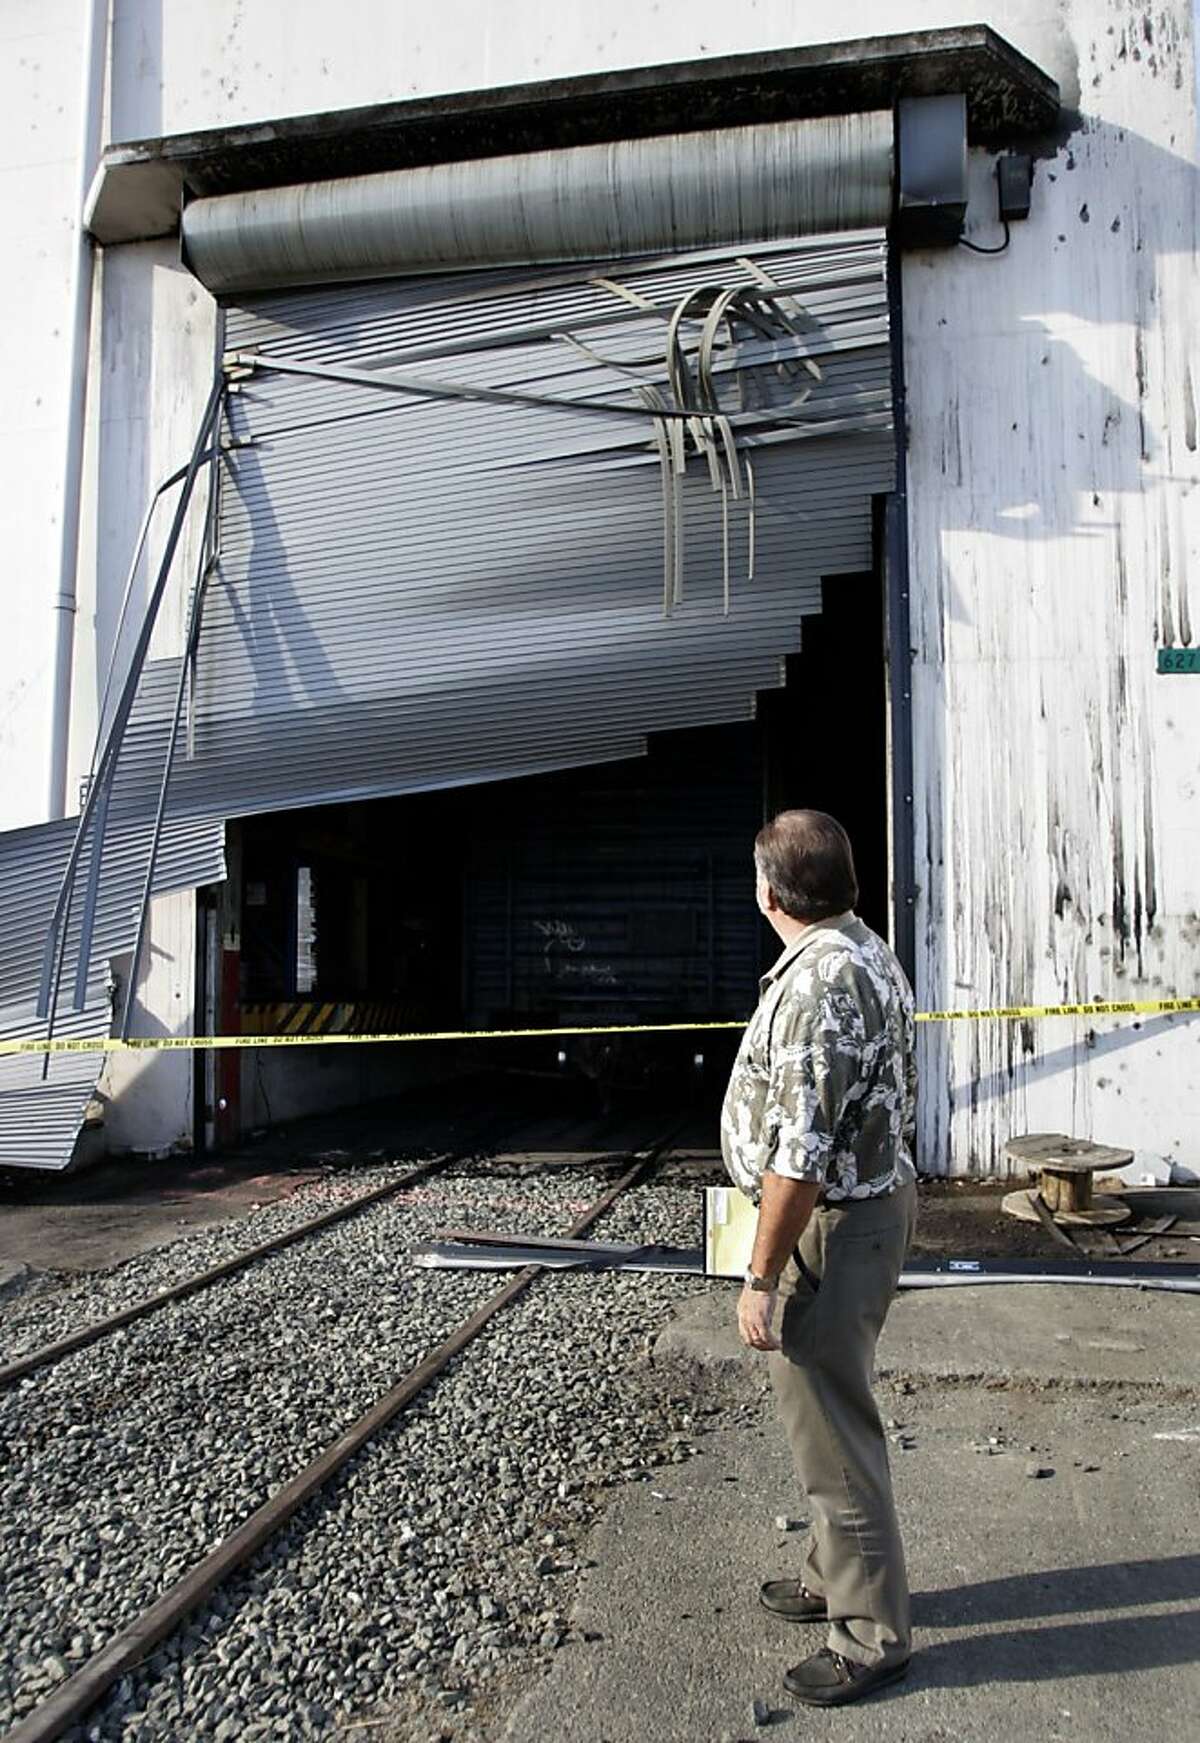 Insurance adjuster Richard Reimche inspects a rollup door which was apparently blown out from the intense heat. ATF agents continue to investigate a warehouse blaze on 10/14/05 in Vallejo, Calif. More than $100 million in wine, including stock of several well-known Bay Area wineries, was destroyed by a blaze that burned through a former torpedo bunker turned wine warehouse on Mare Island Wednesday.